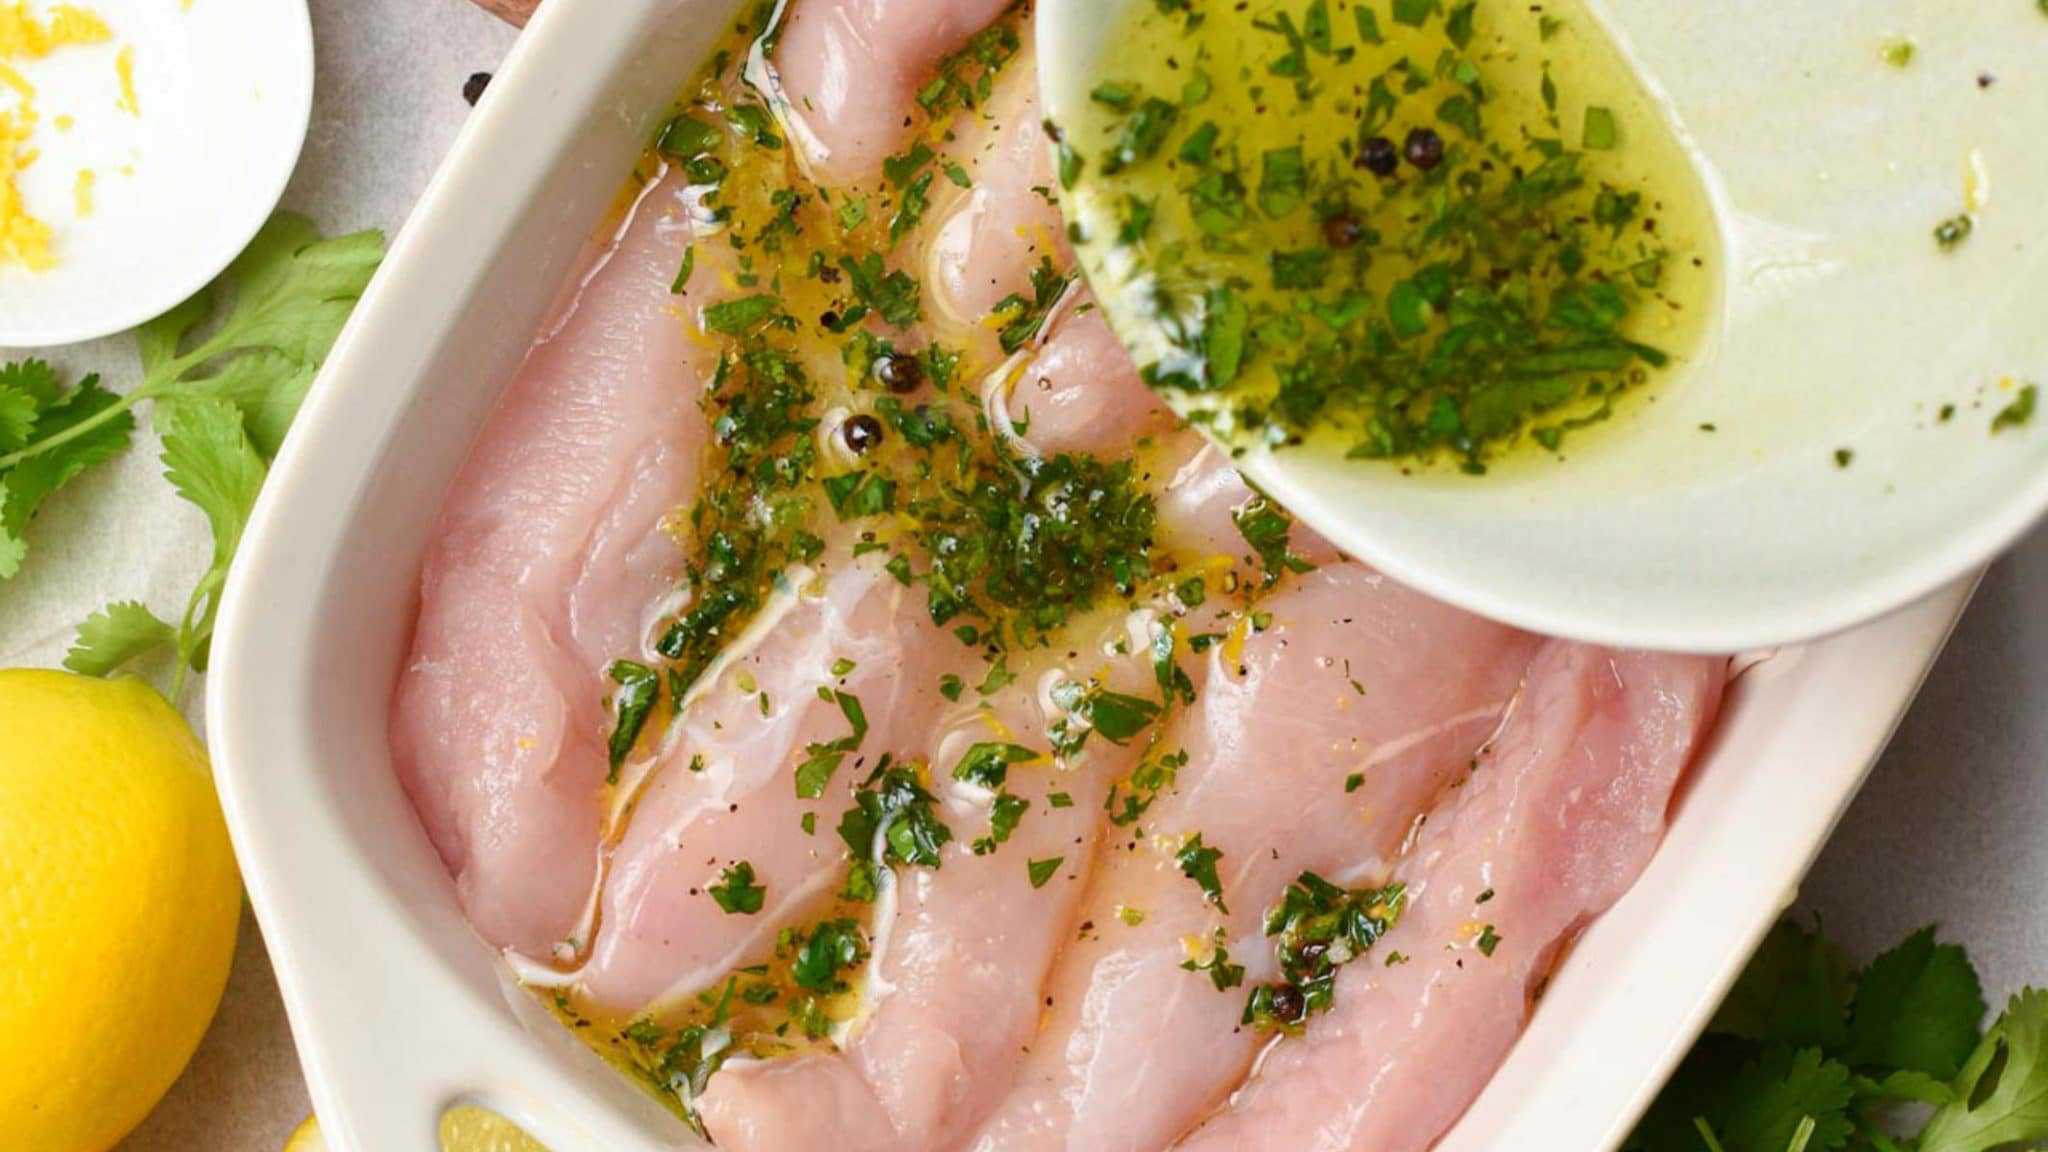 Do’s and Don’ts When Marinating Chicken